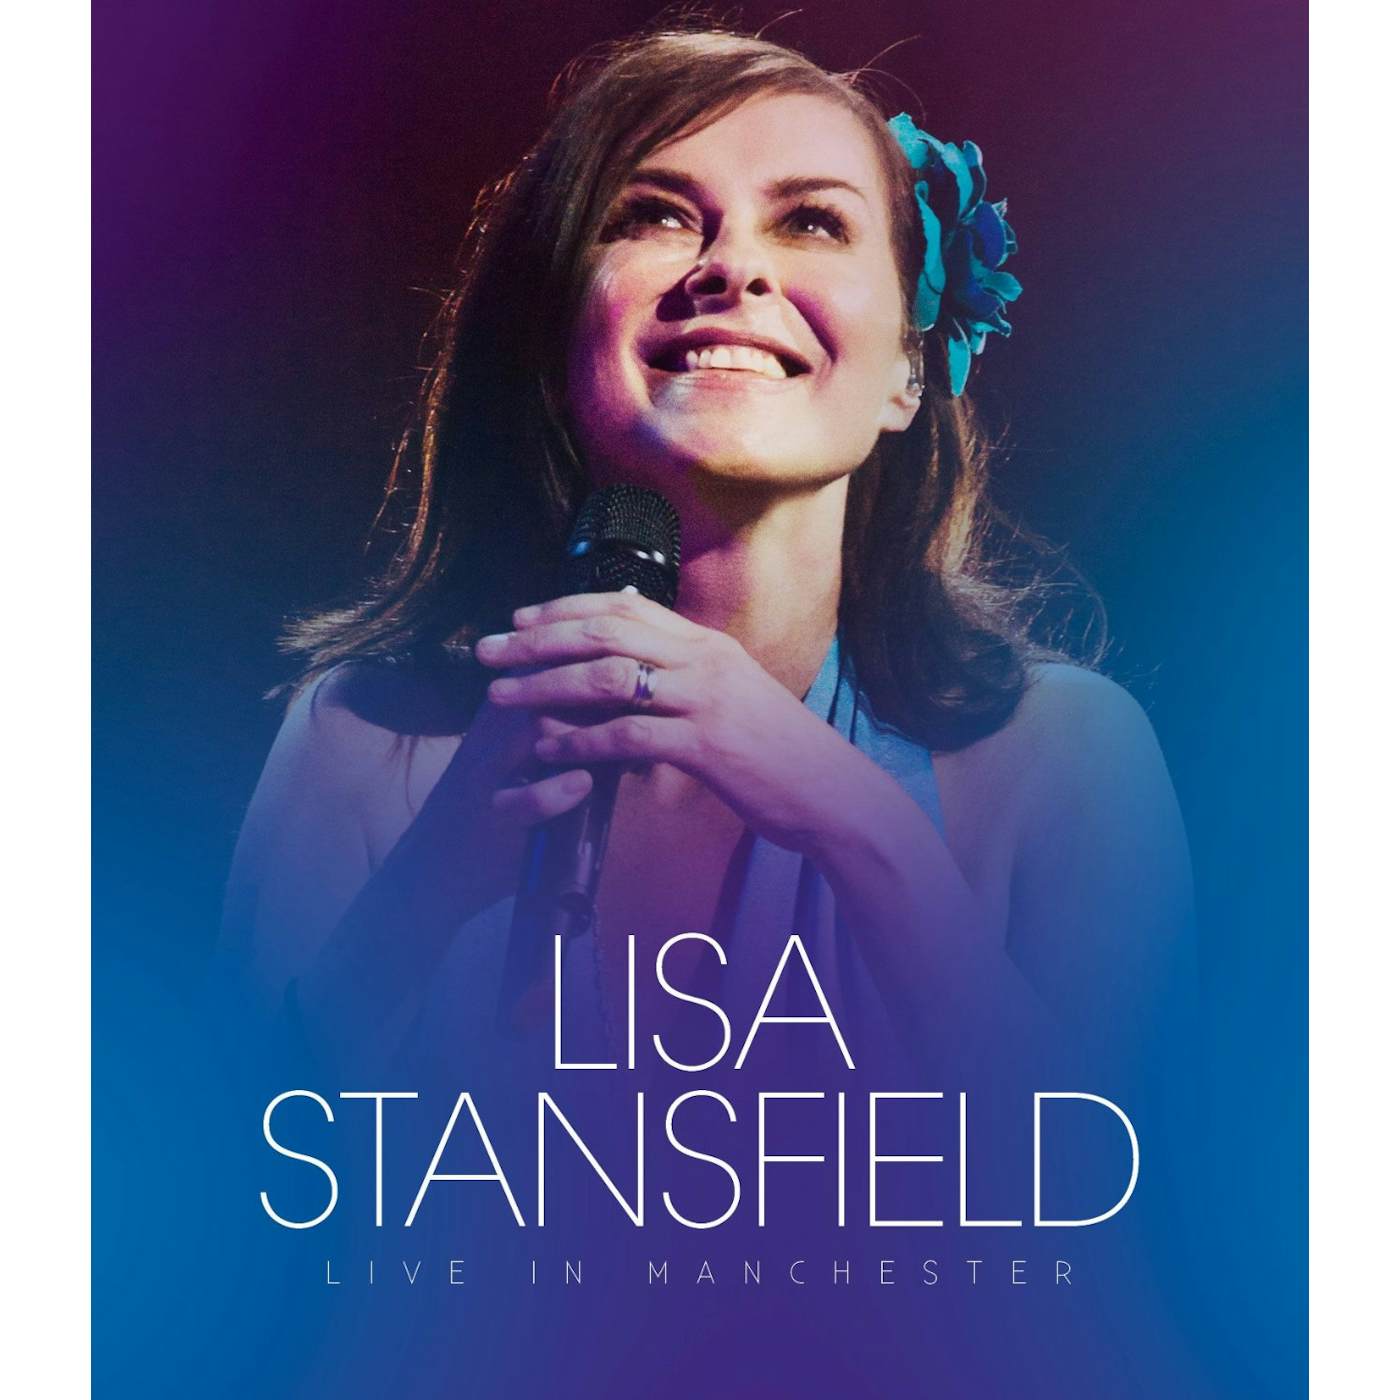 Lisa Stansfield LIVE IN MANCHESTER Blu-ray